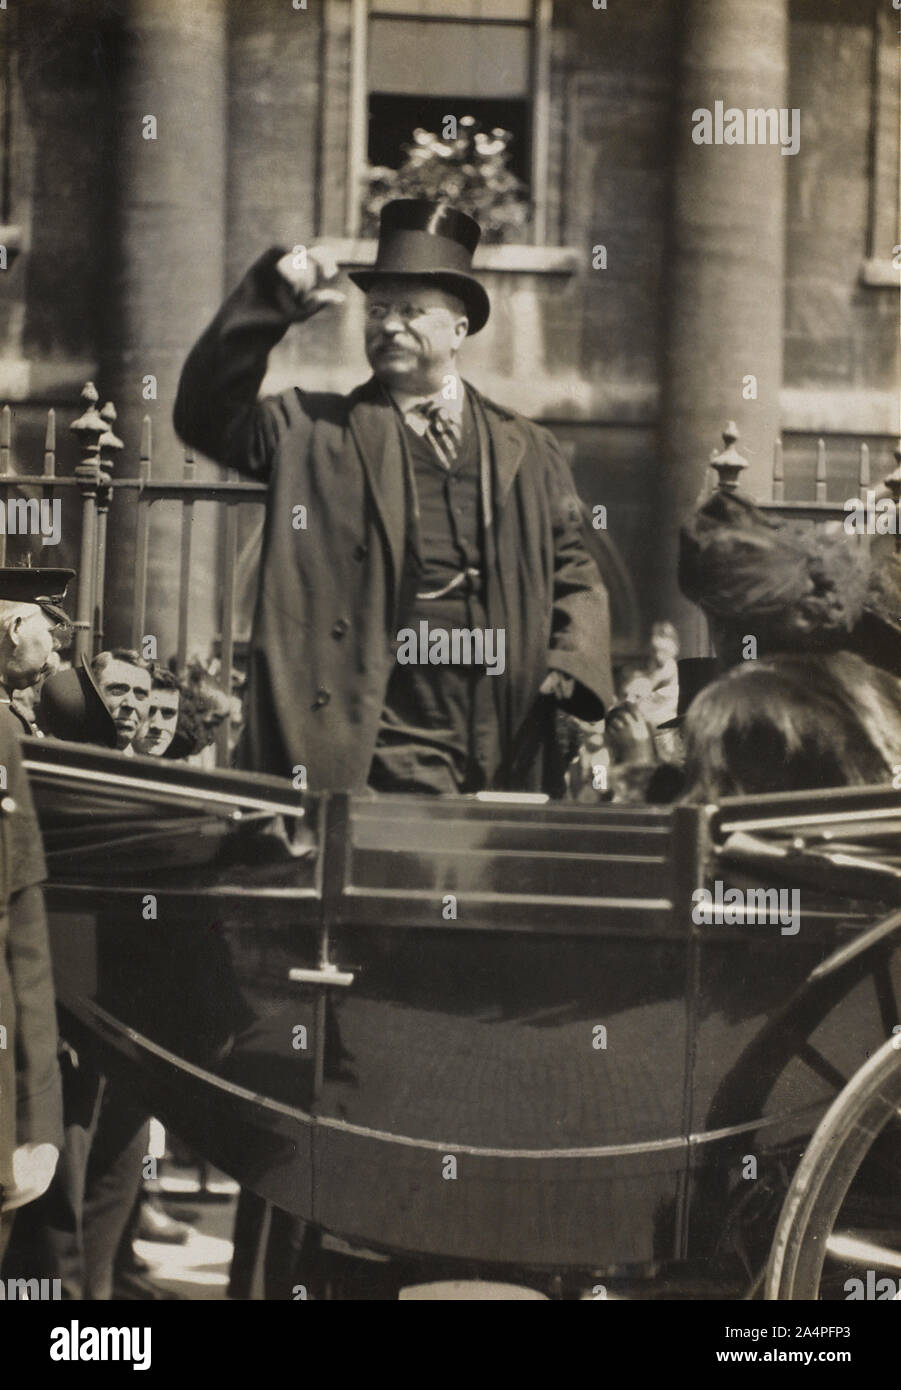 Theodore Roosevelt Saluting Crowd during Public Appearance, New York City, New York, USA, American Press Association, July 1910 Stock Photo